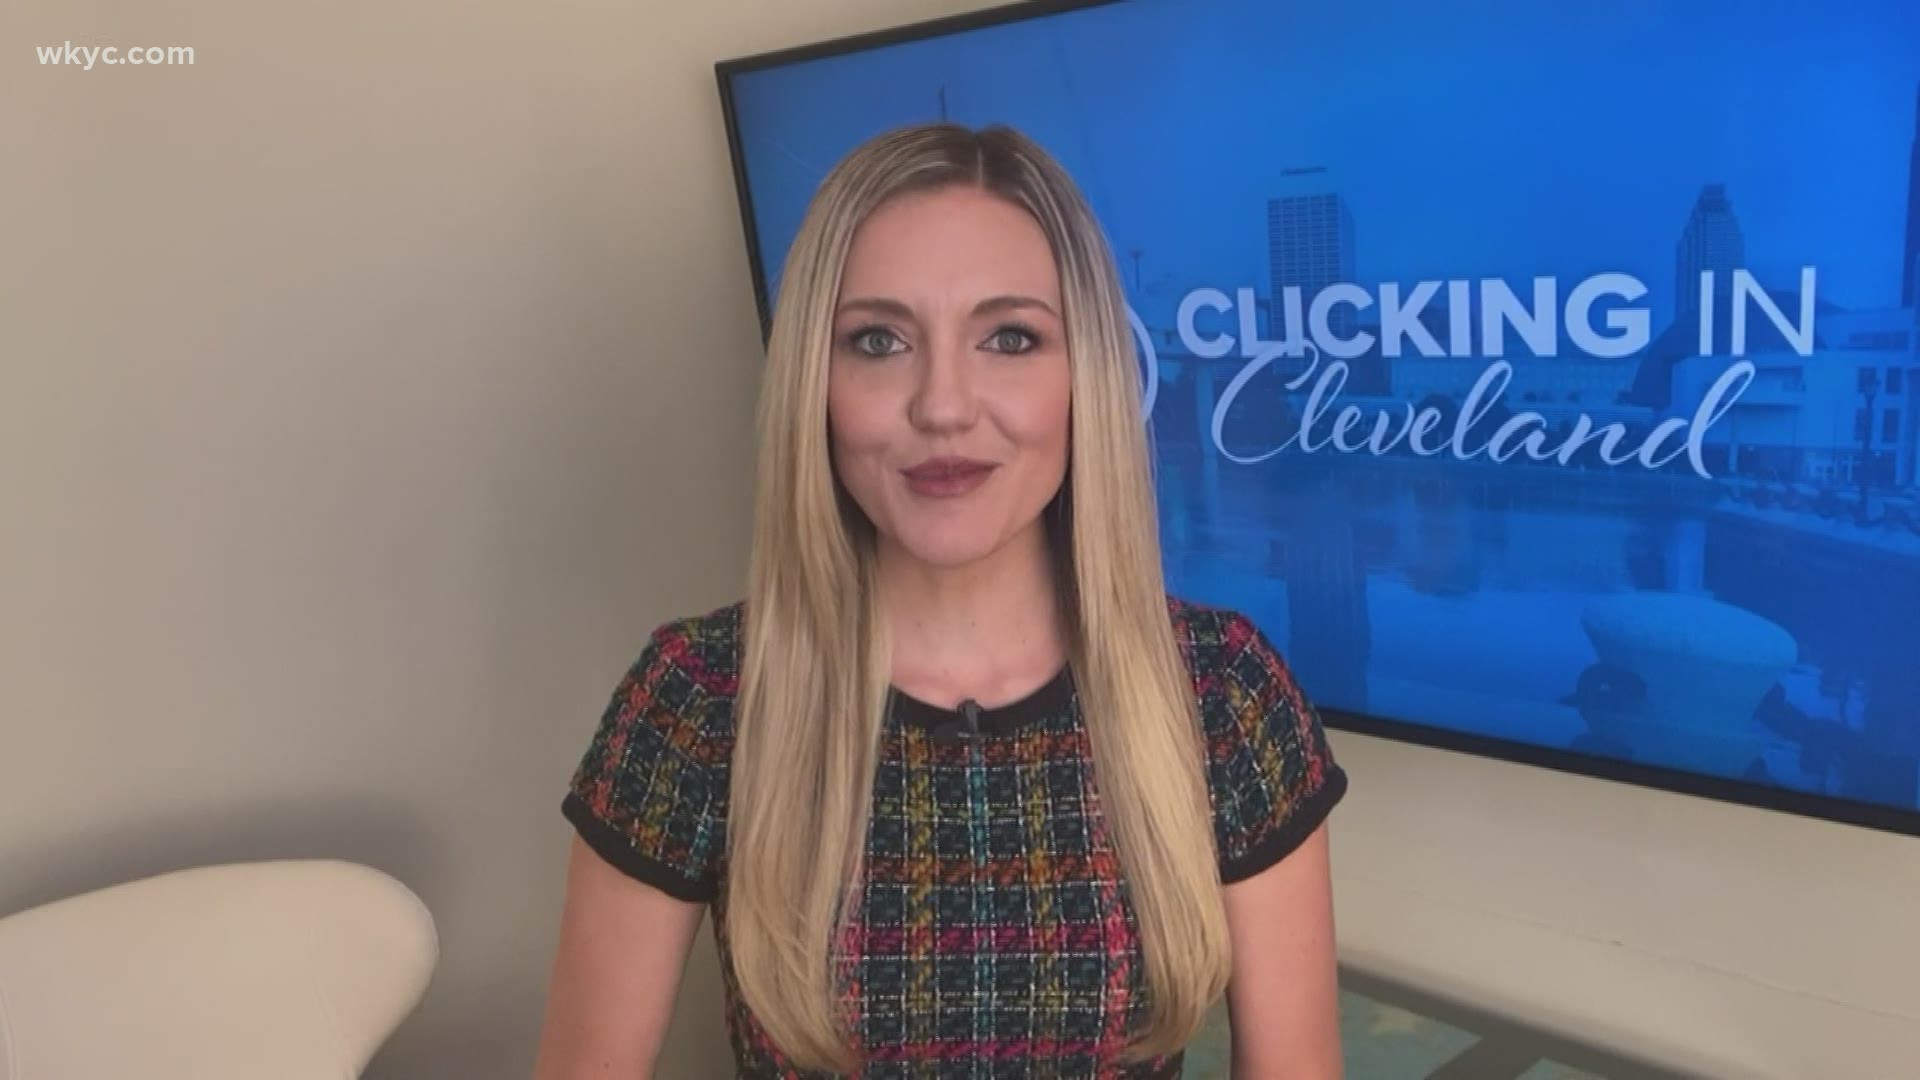 Have you done your holiday shopping yet? Are you looking to support local? In today's Clicking in Cleveland, 3News' Stephanie Haney details some local gift ideas!